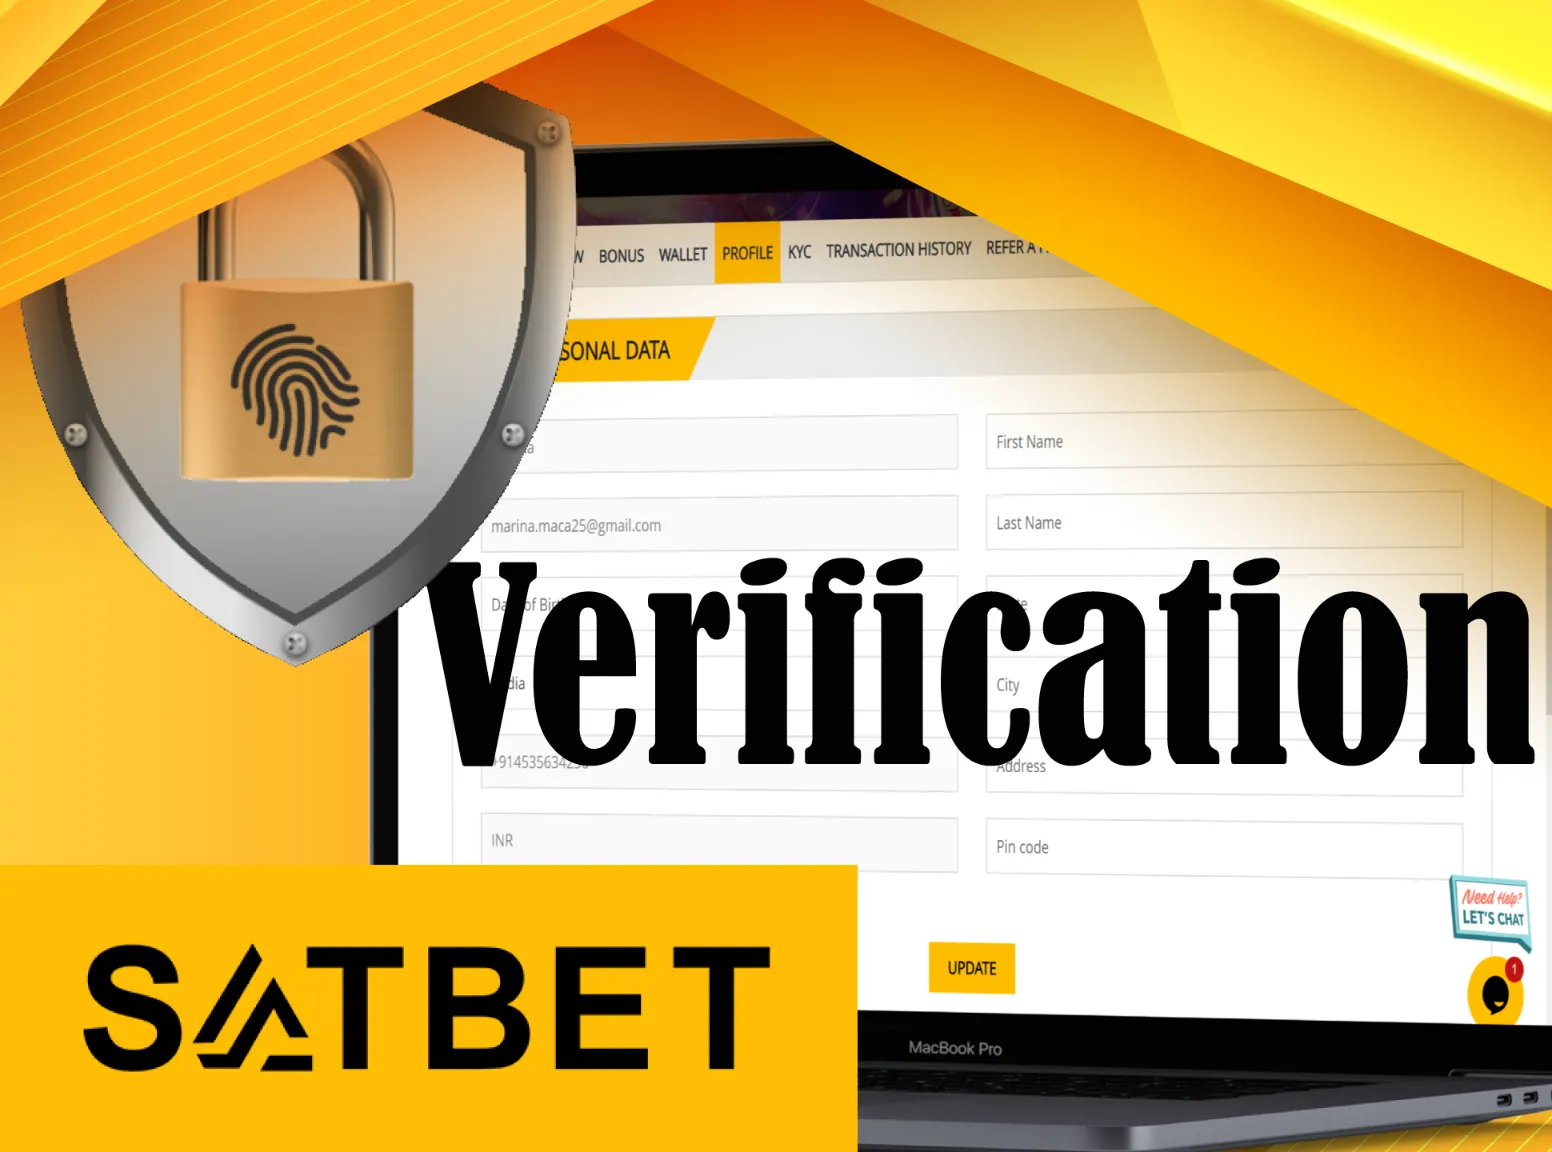 Provide required data for verifying your Satbet account.